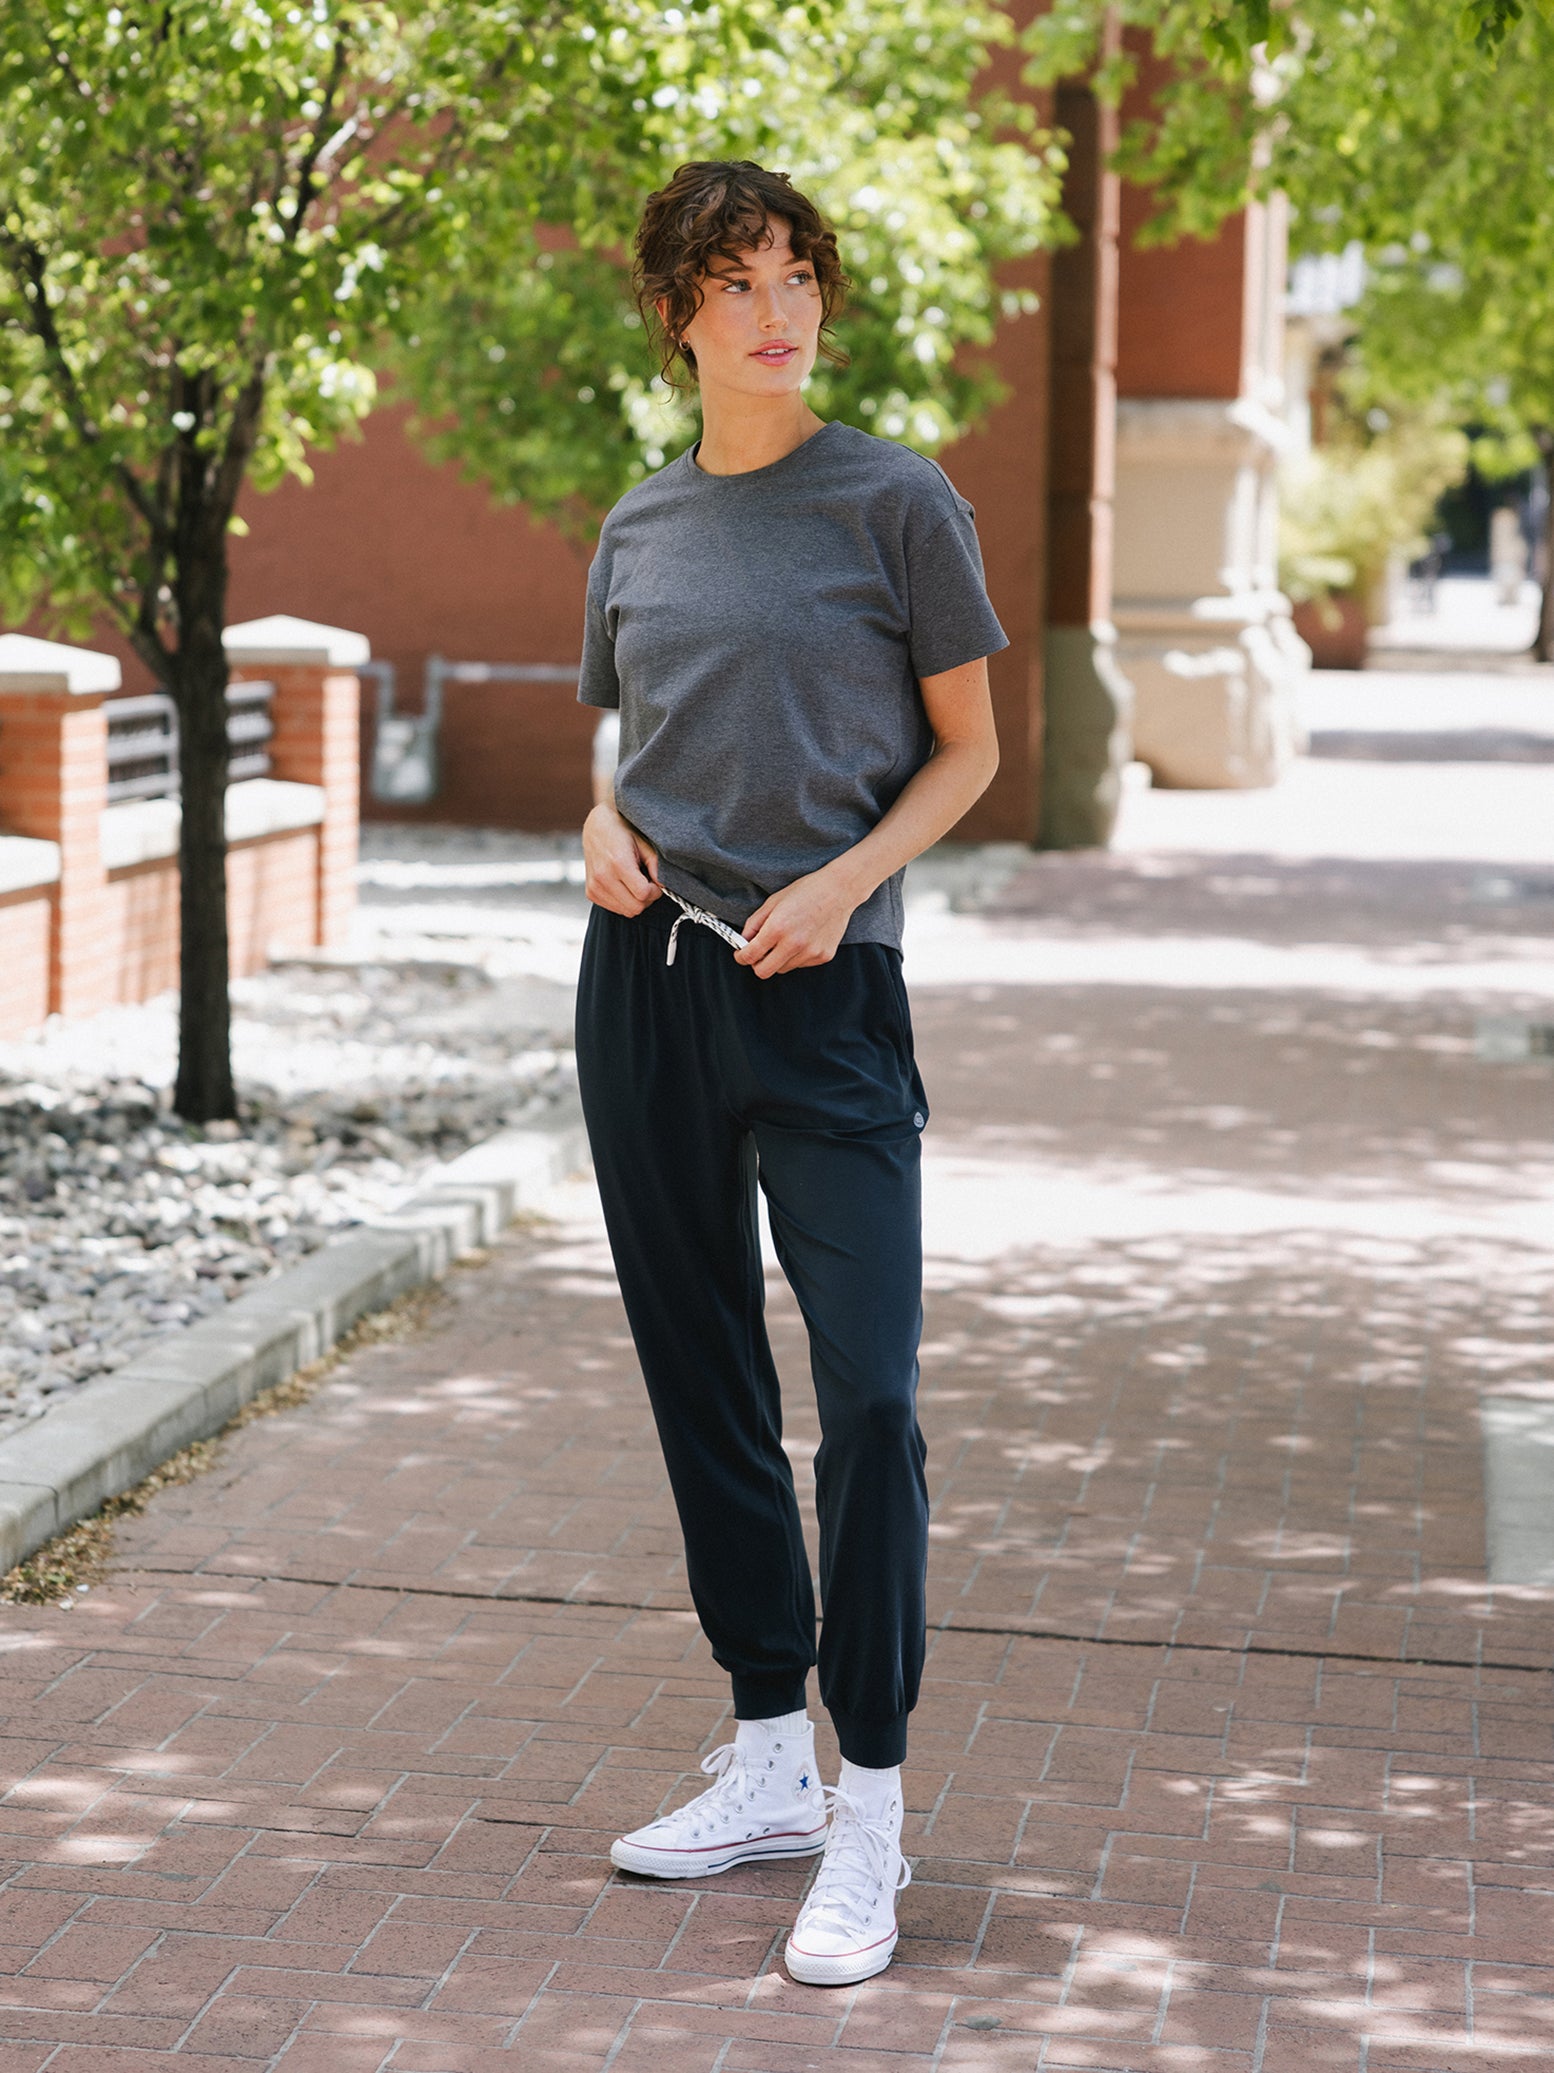 Eclipse Studio Jogger. The Studio Joggers are worn by a woman photographed with a city type background. 